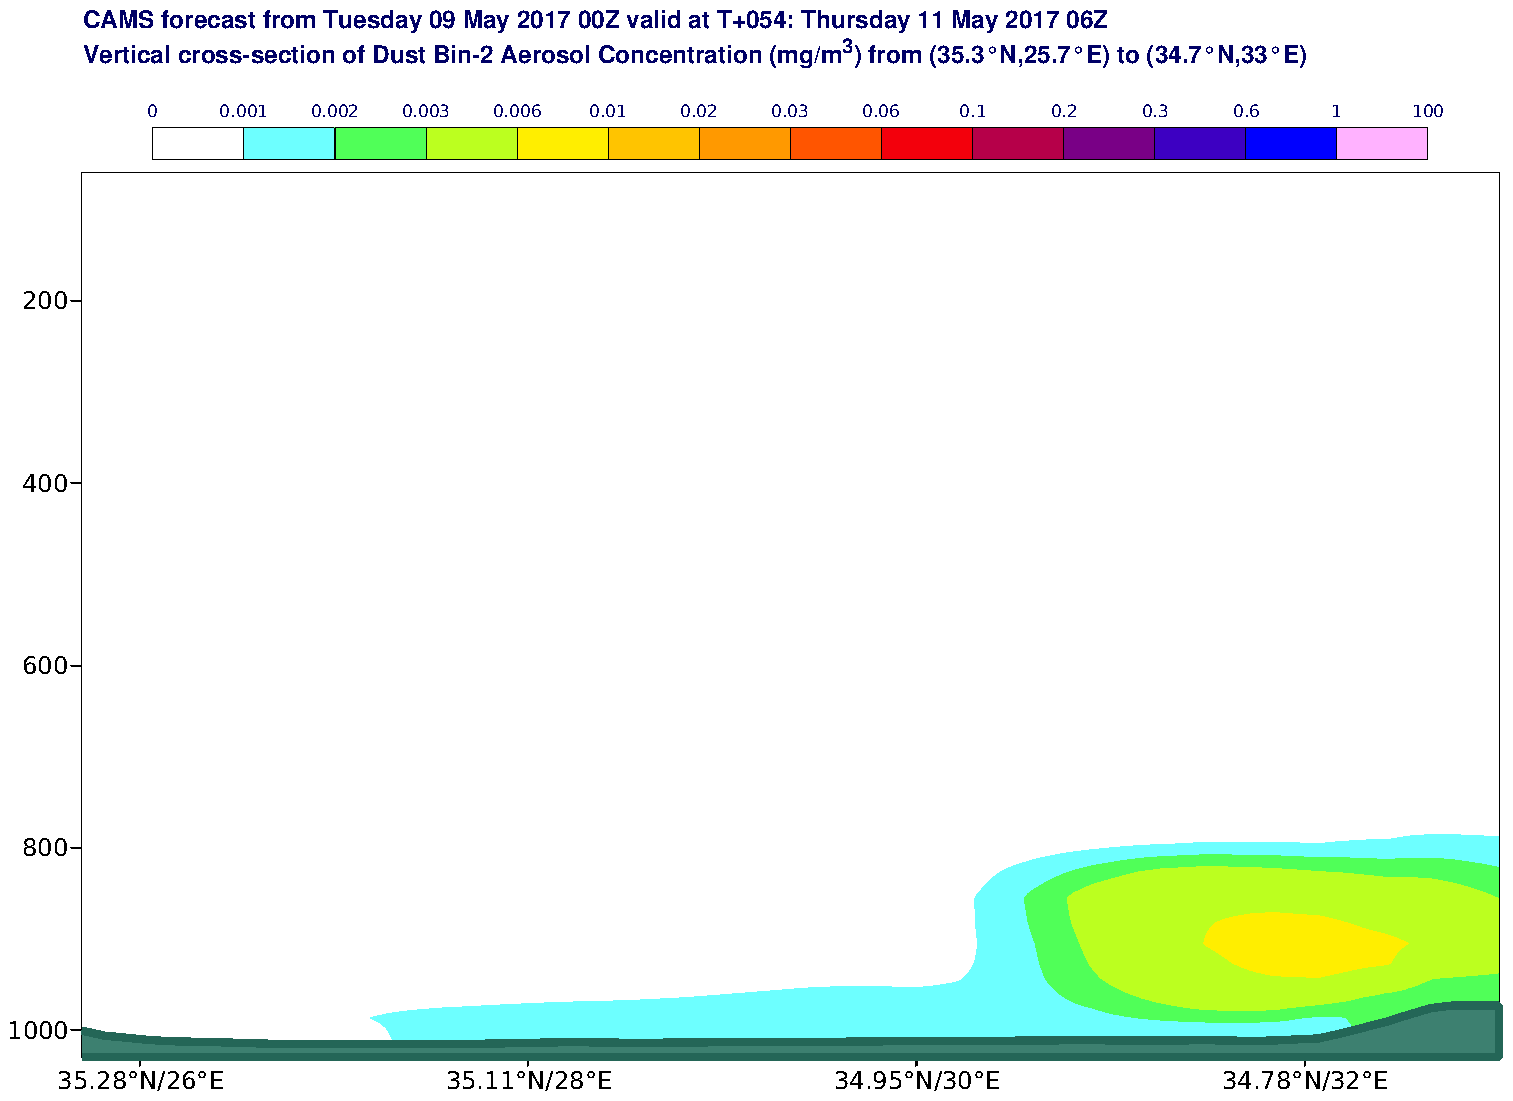 Vertical cross-section of Dust Bin-2 Aerosol Concentration (mg/m3) valid at T54 - 2017-05-11 06:00